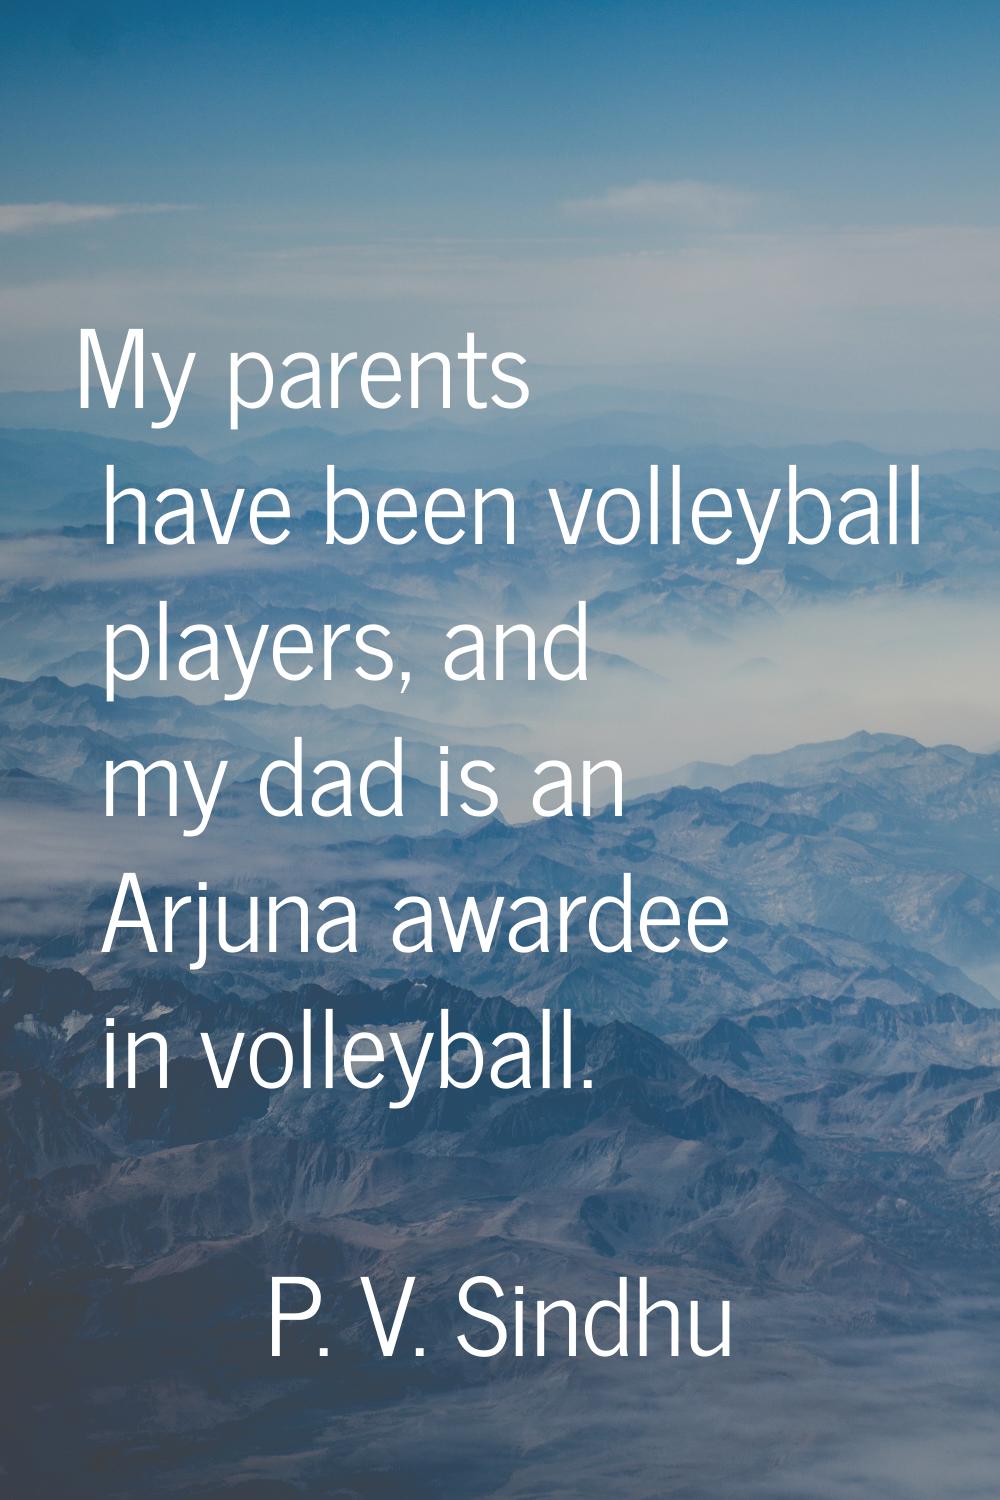 My parents have been volleyball players, and my dad is an Arjuna awardee in volleyball.